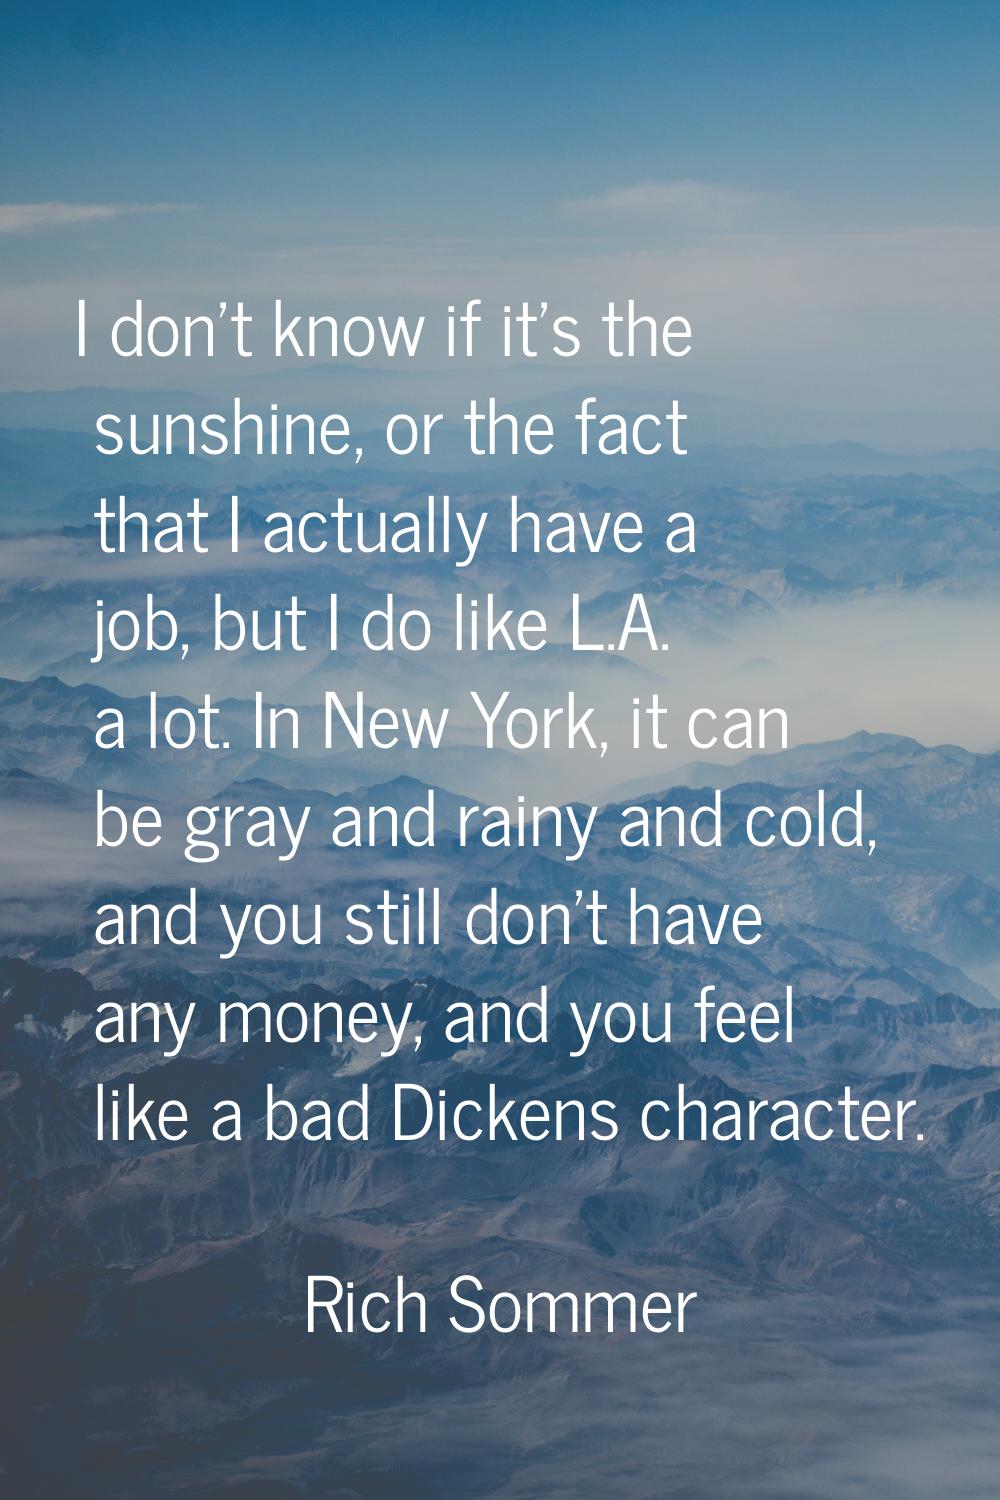 I don't know if it's the sunshine, or the fact that I actually have a job, but I do like L.A. a lot